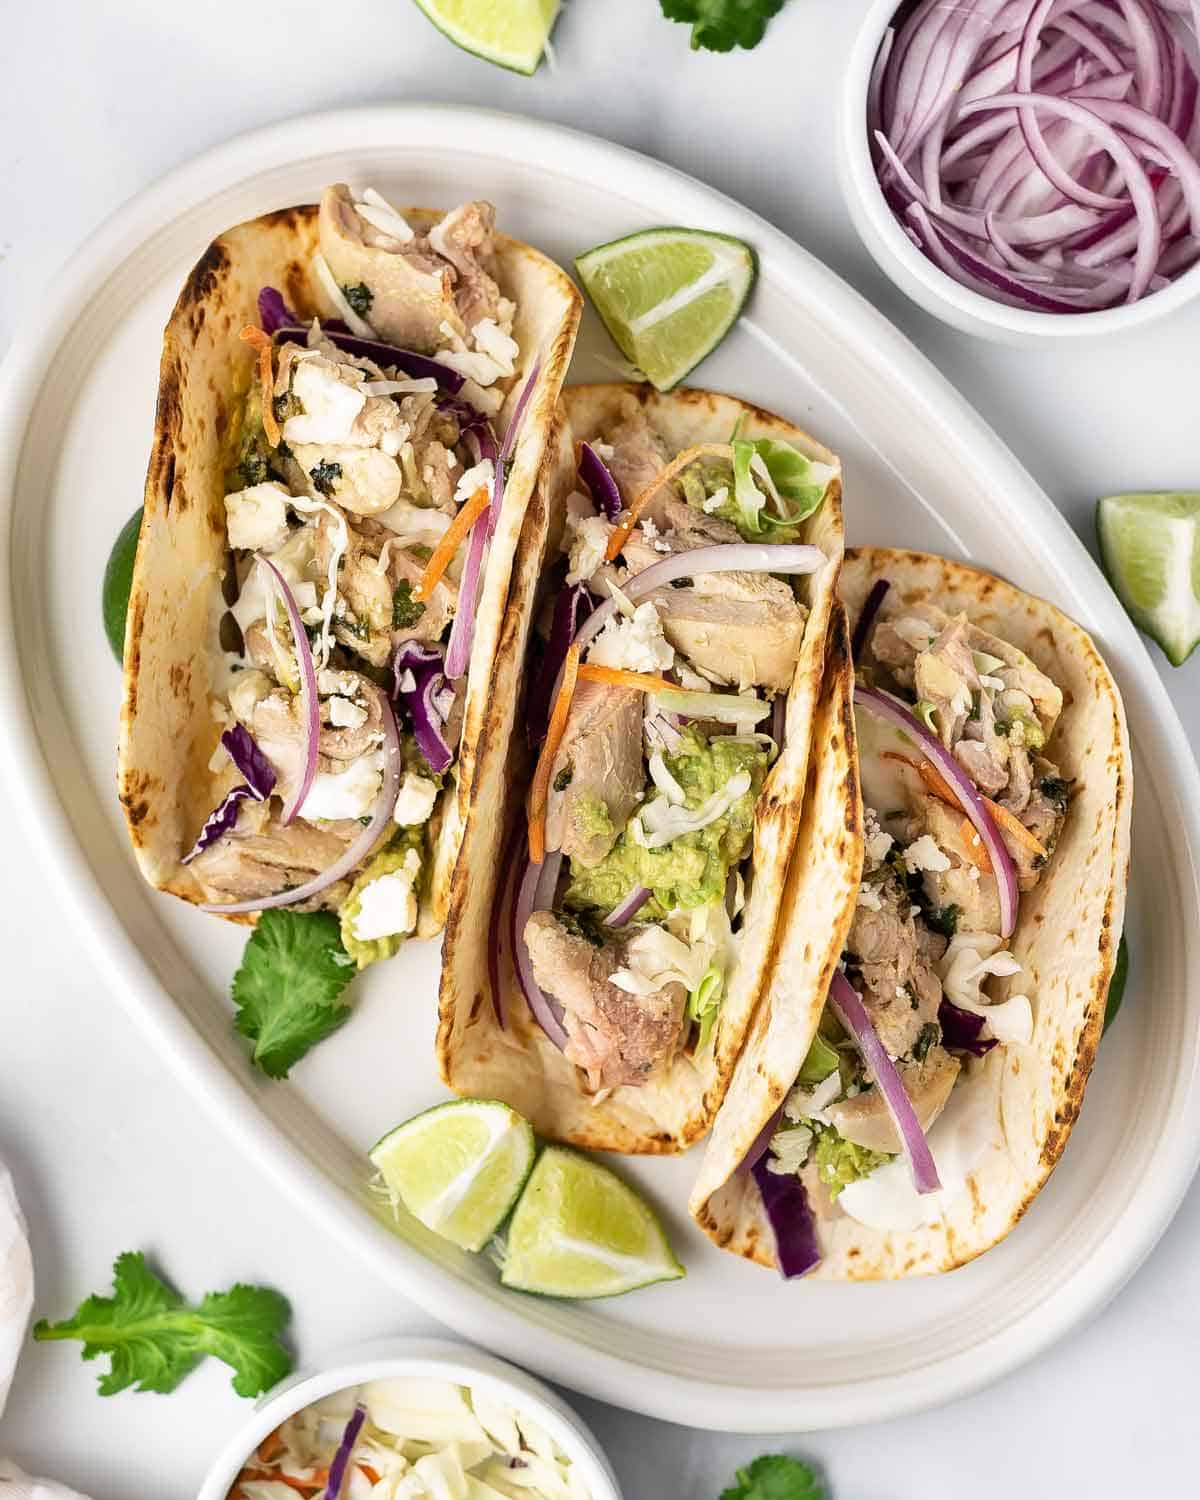 Three cilantro lime chicken tacos in a plate.